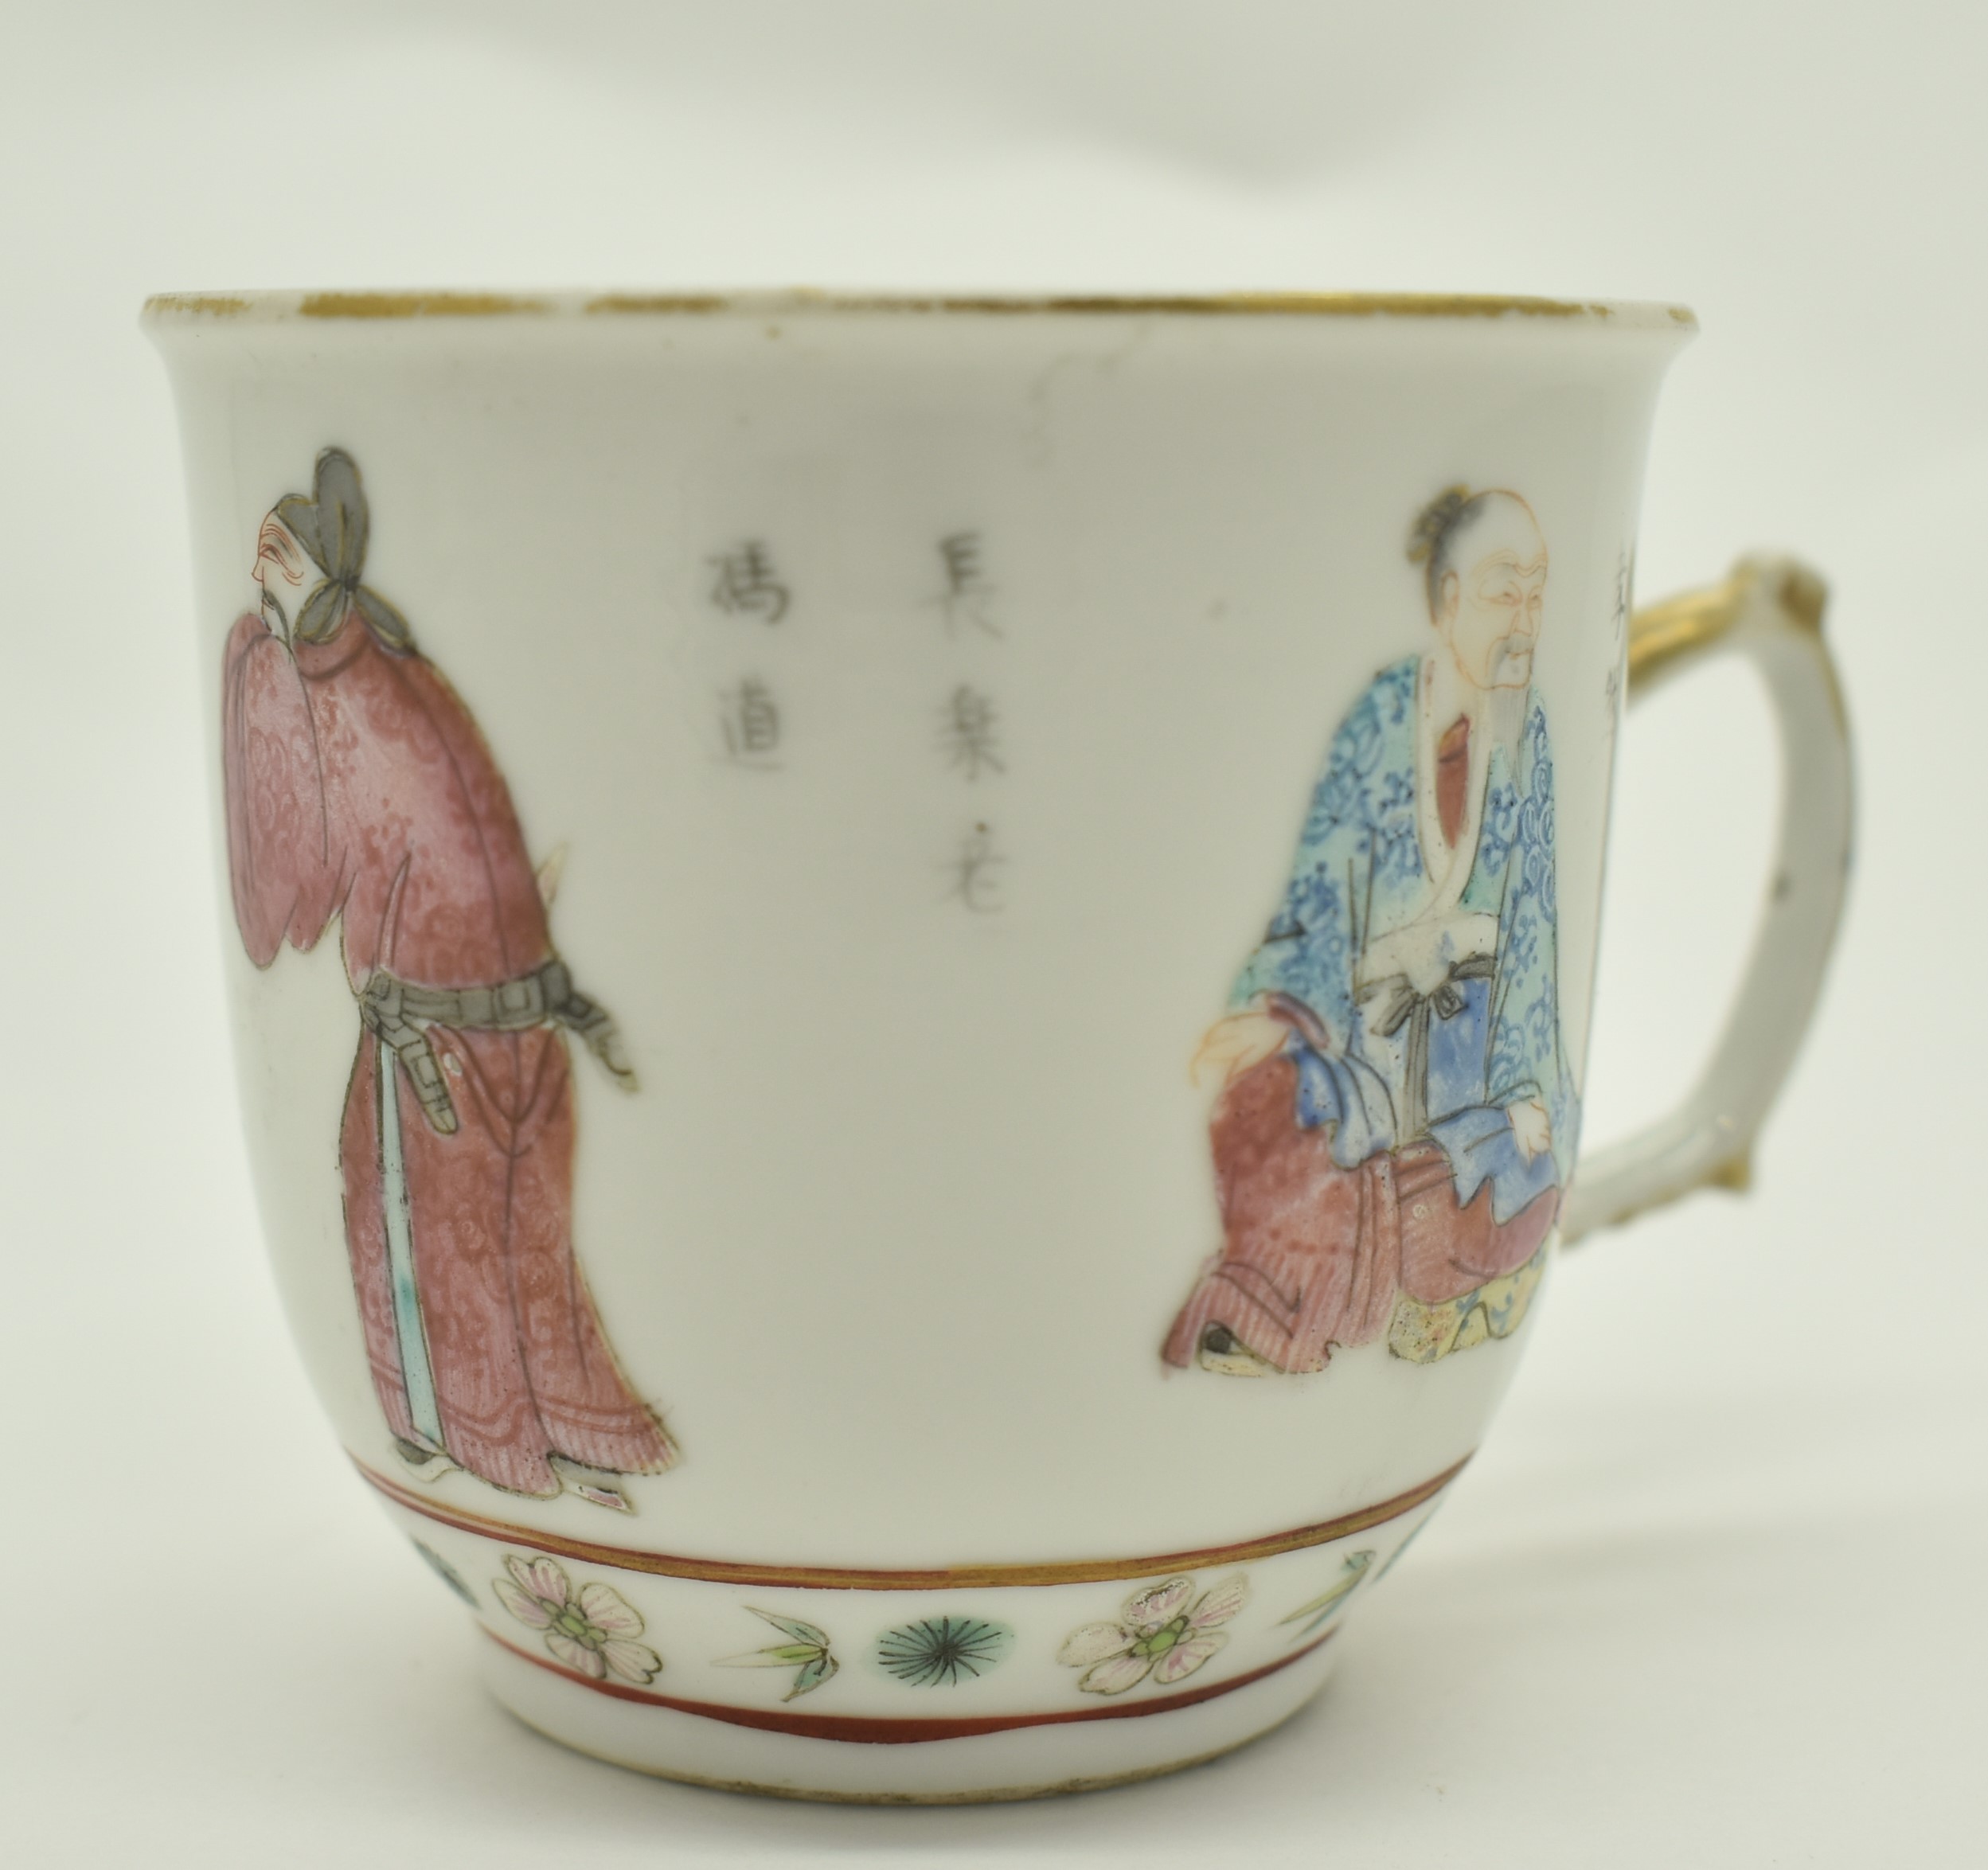 FAMILLE ROSE WU SHUANG PU CUP WITH HANDLE 道光粉彩无双谱人物杯 - Image 9 of 13